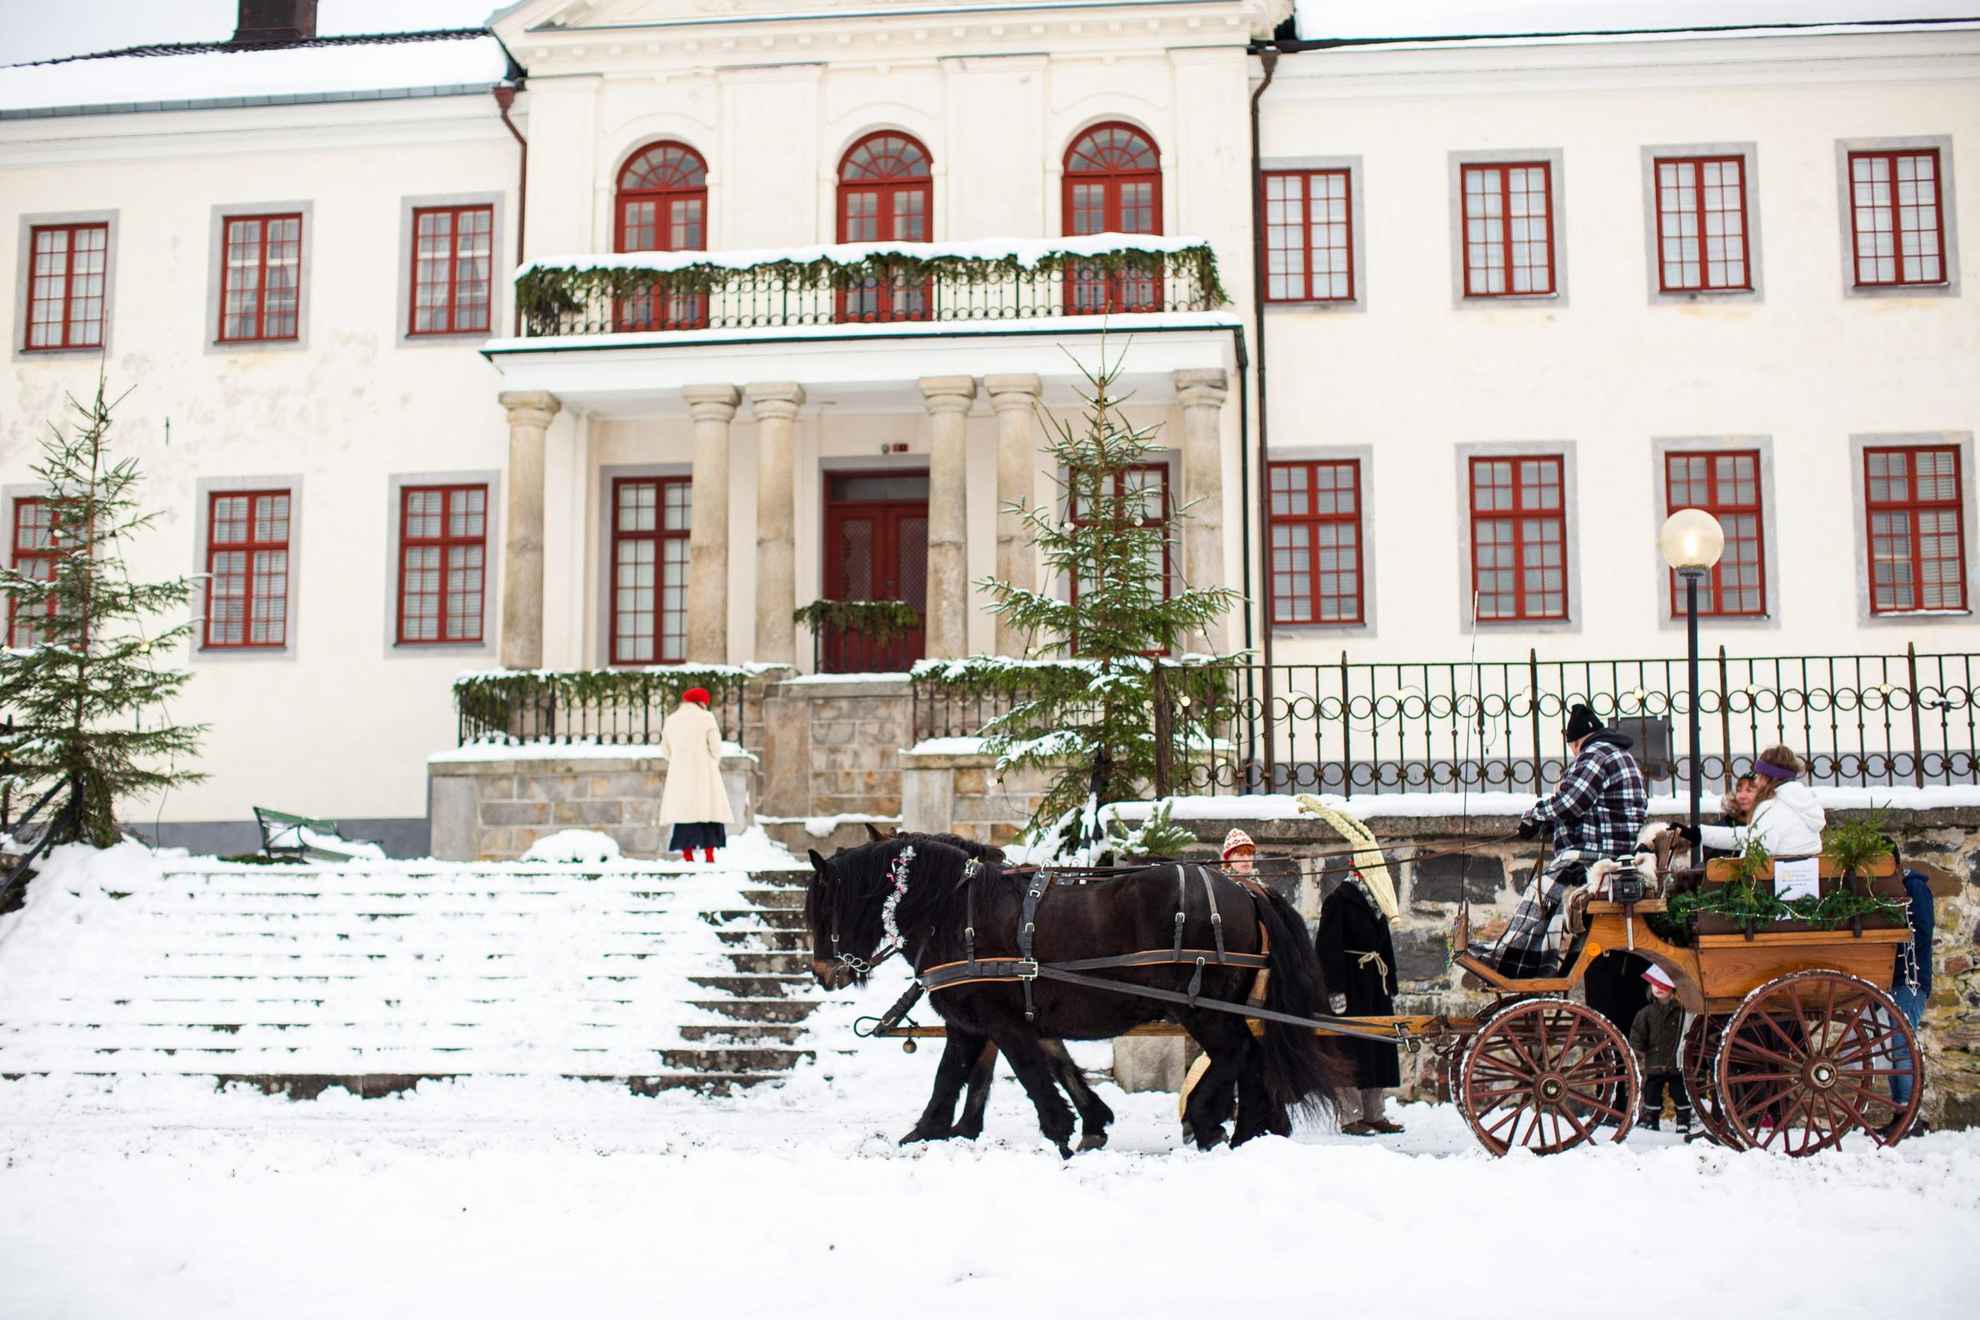 A horse and carriage stand in front of a large white house during winter. There is snow on the ground, a few people standing next to the carriage and a few sitting on it.